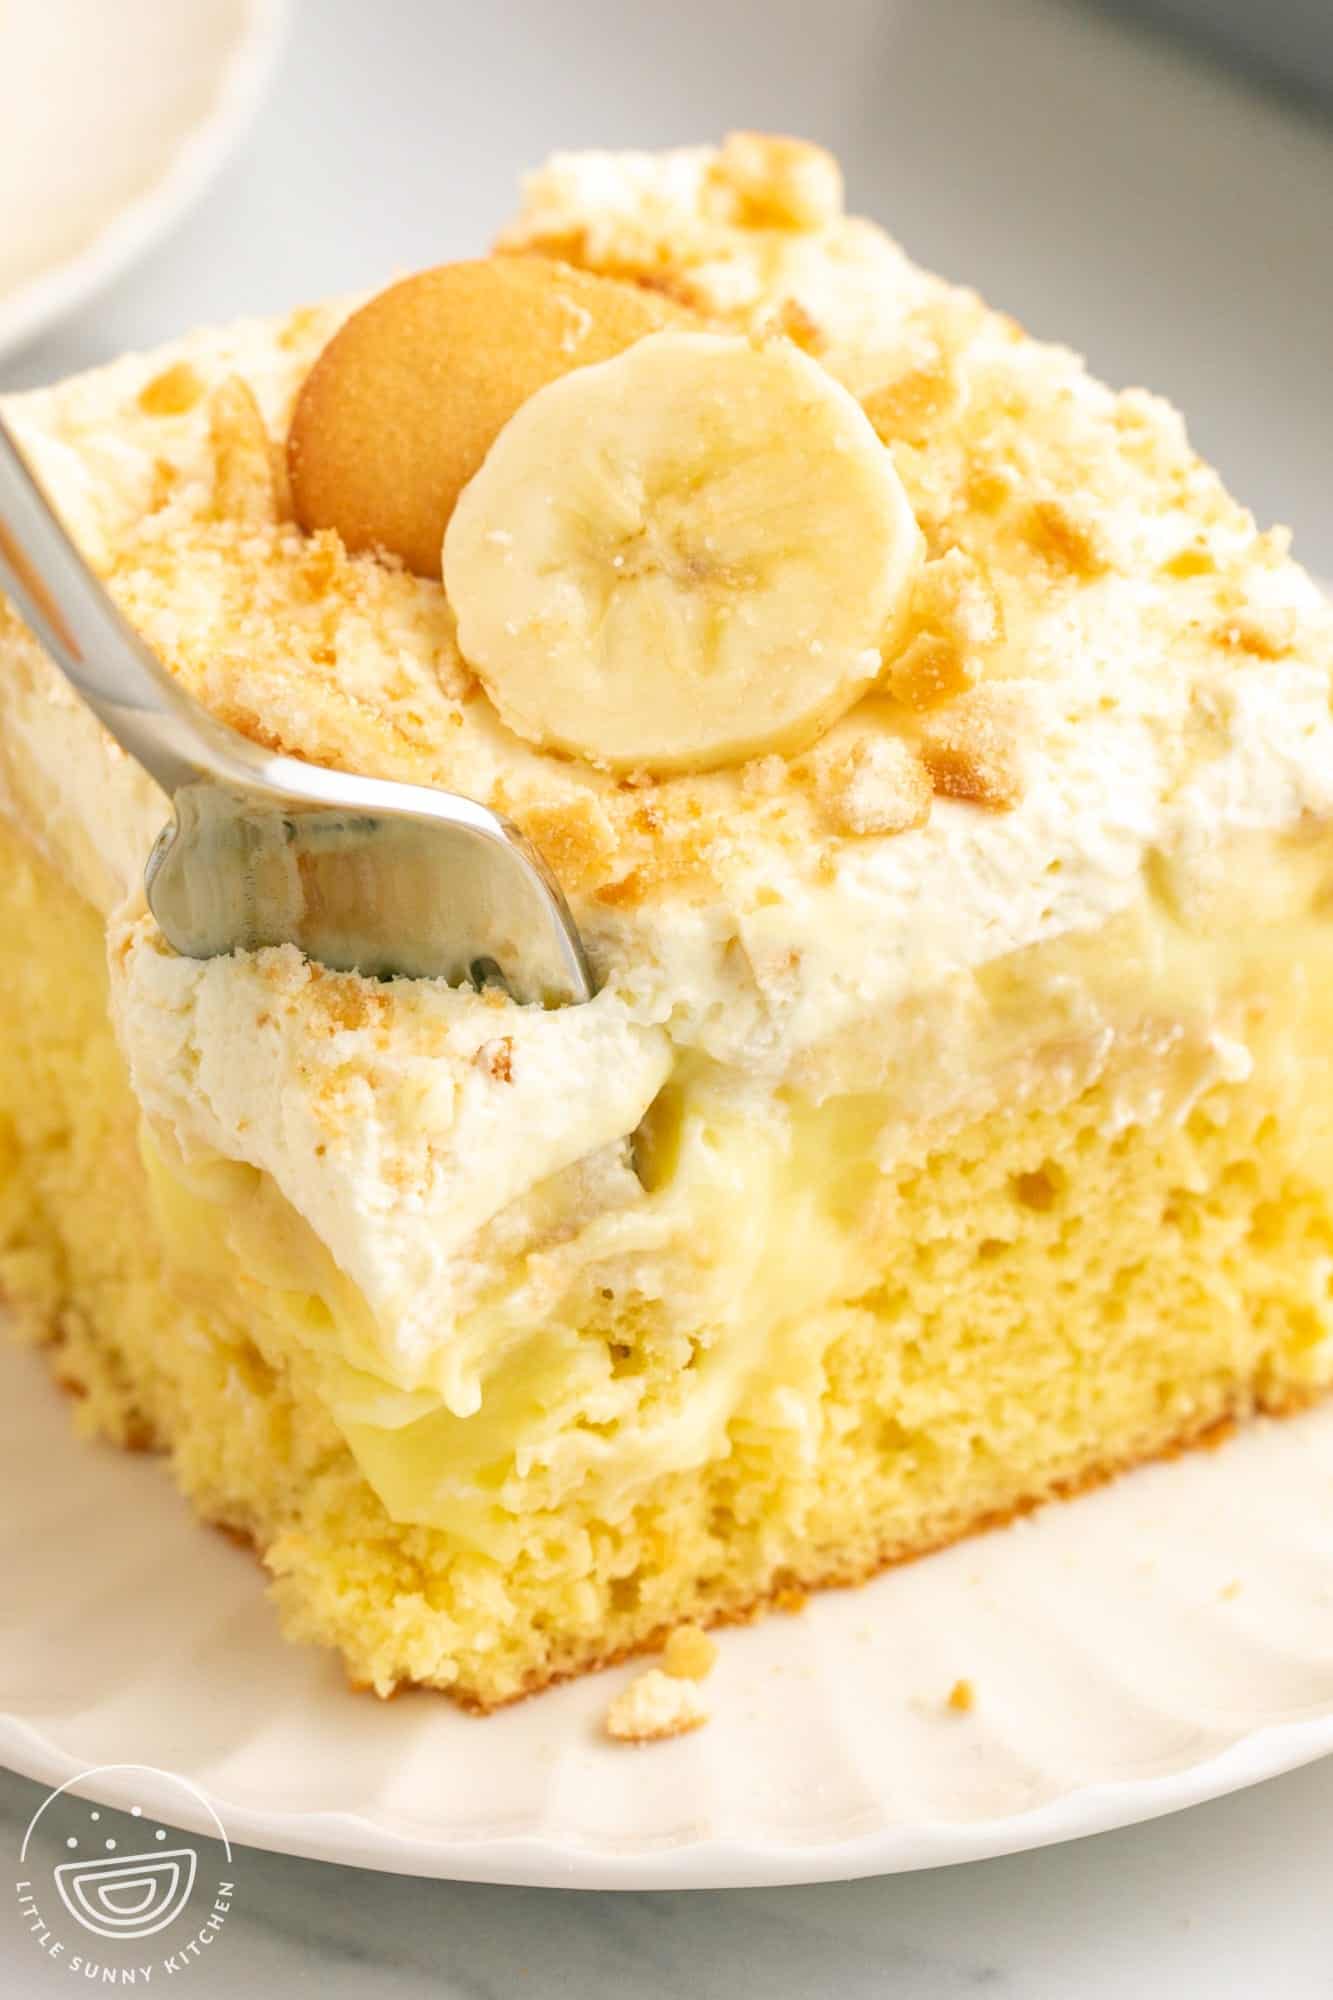 a square slice of banana poke cake on a plate. A fork is taking a bite from the front left corner.